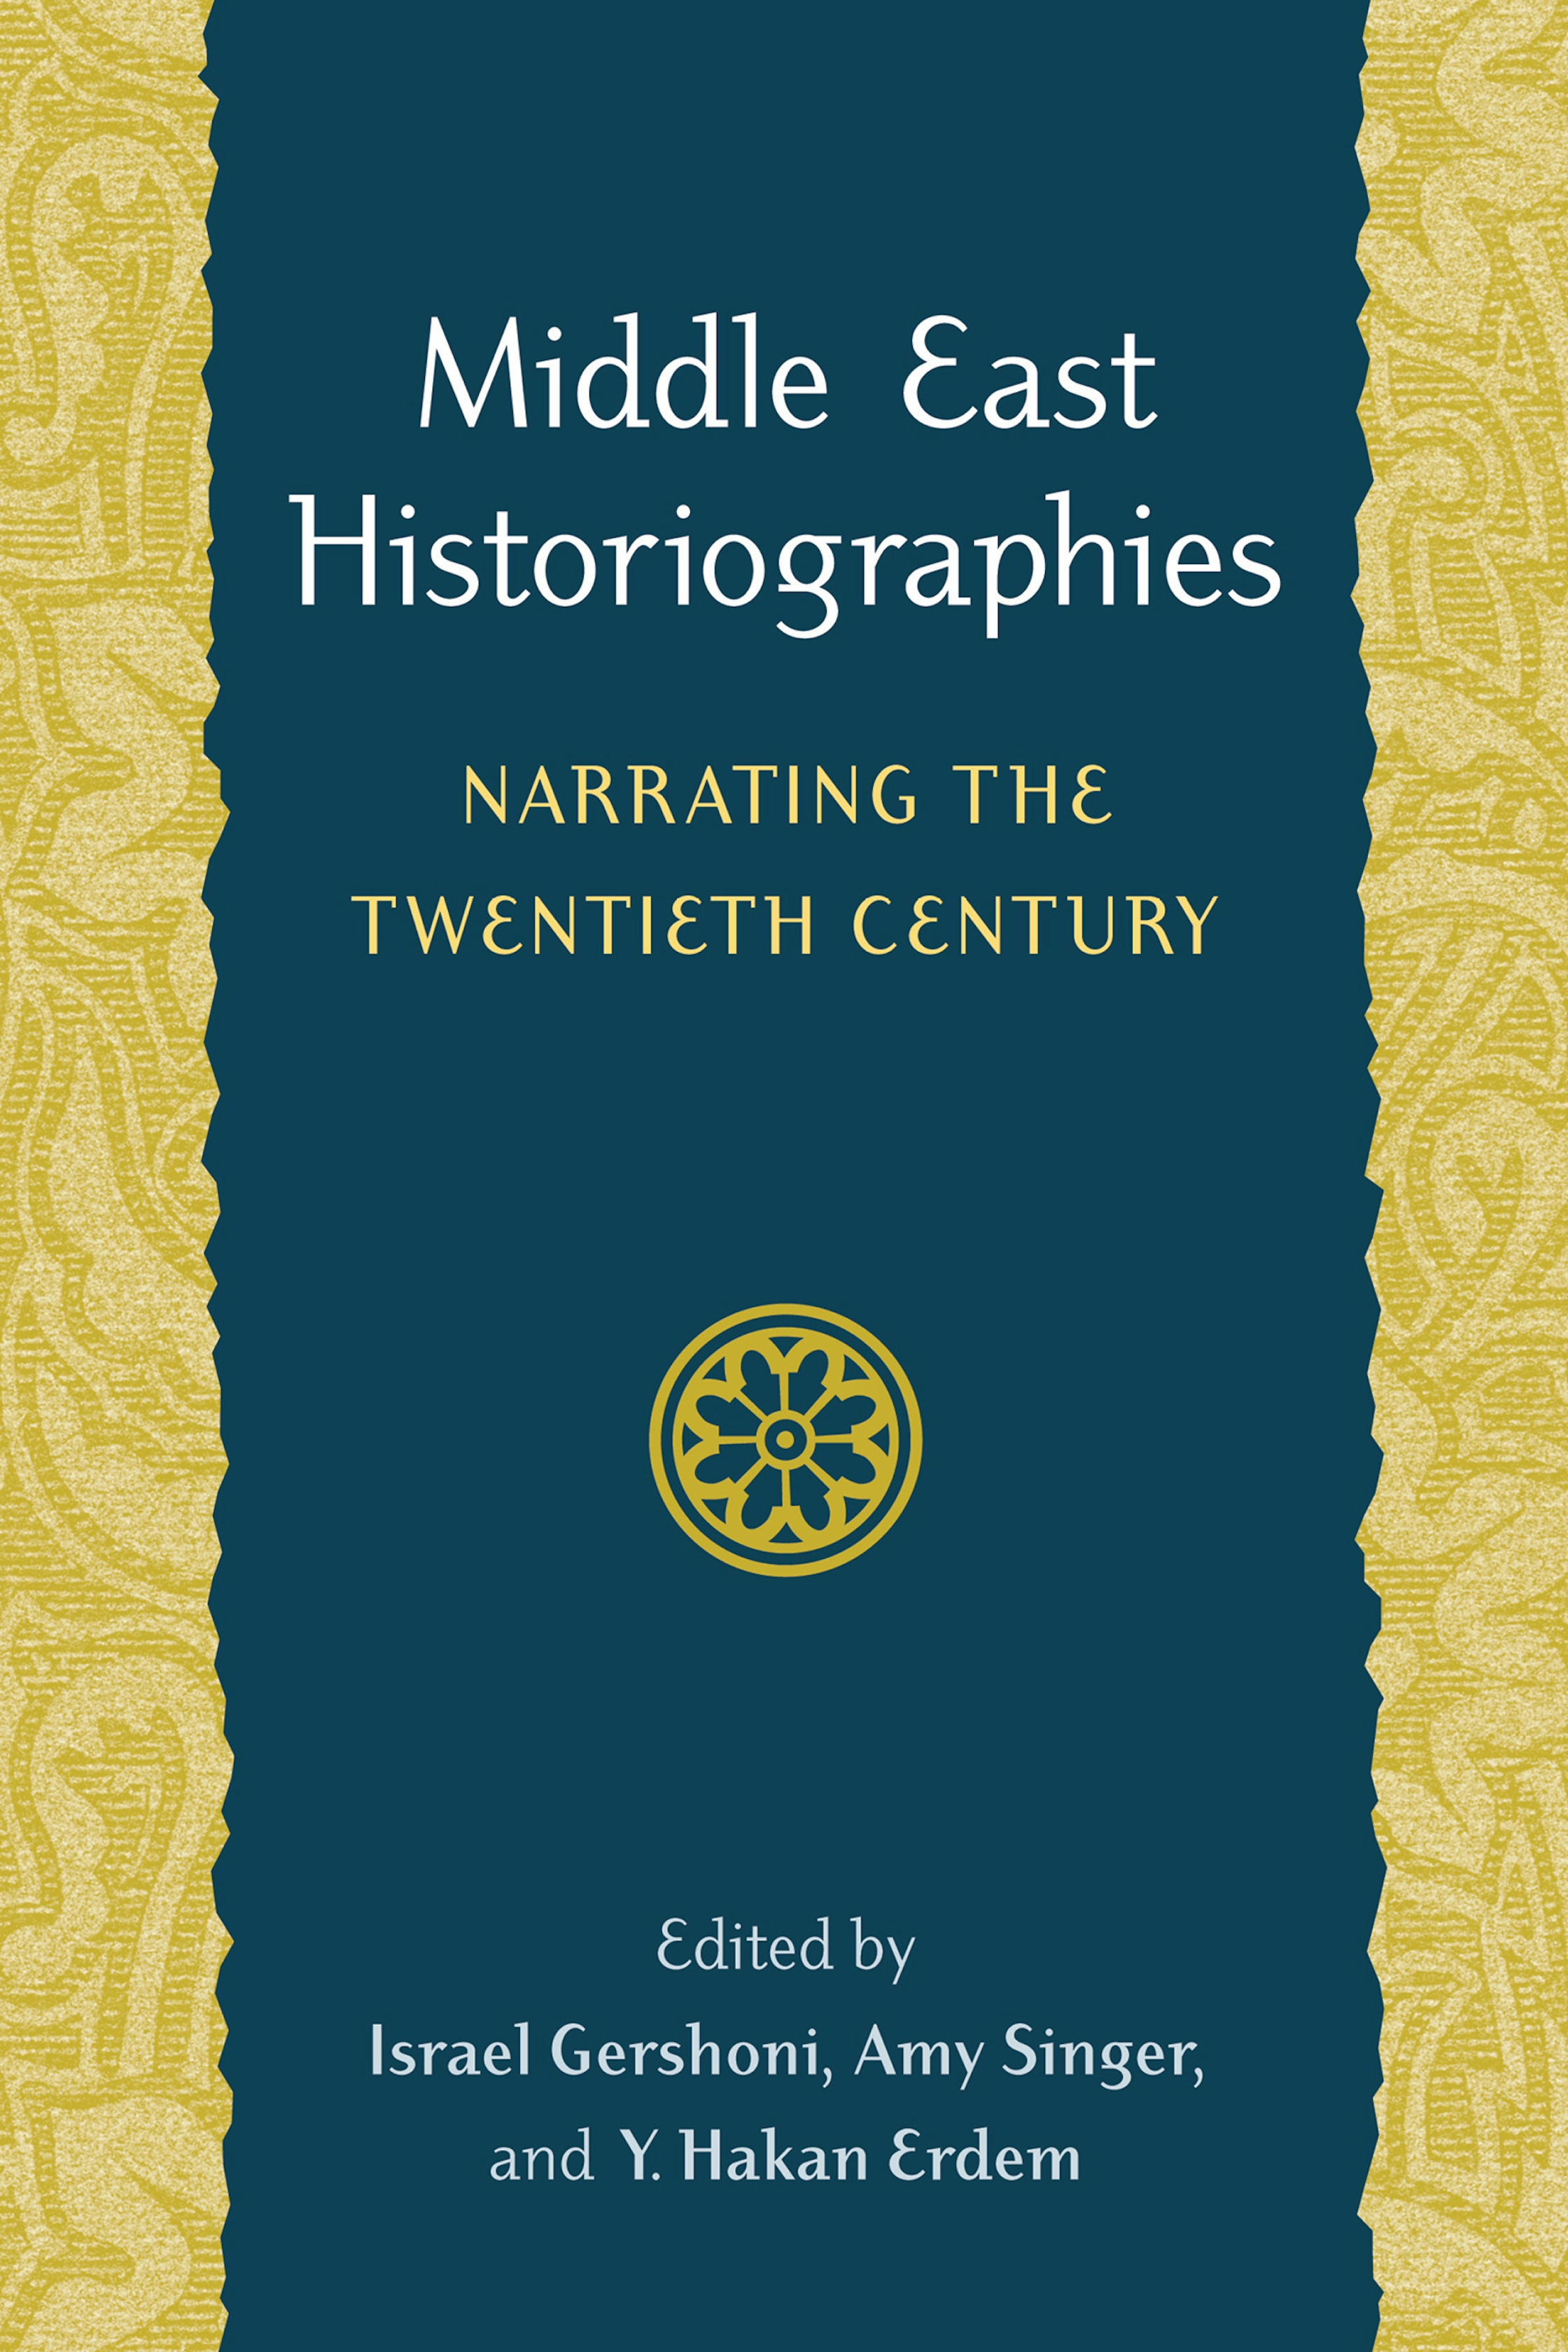 Middle East Historiographies